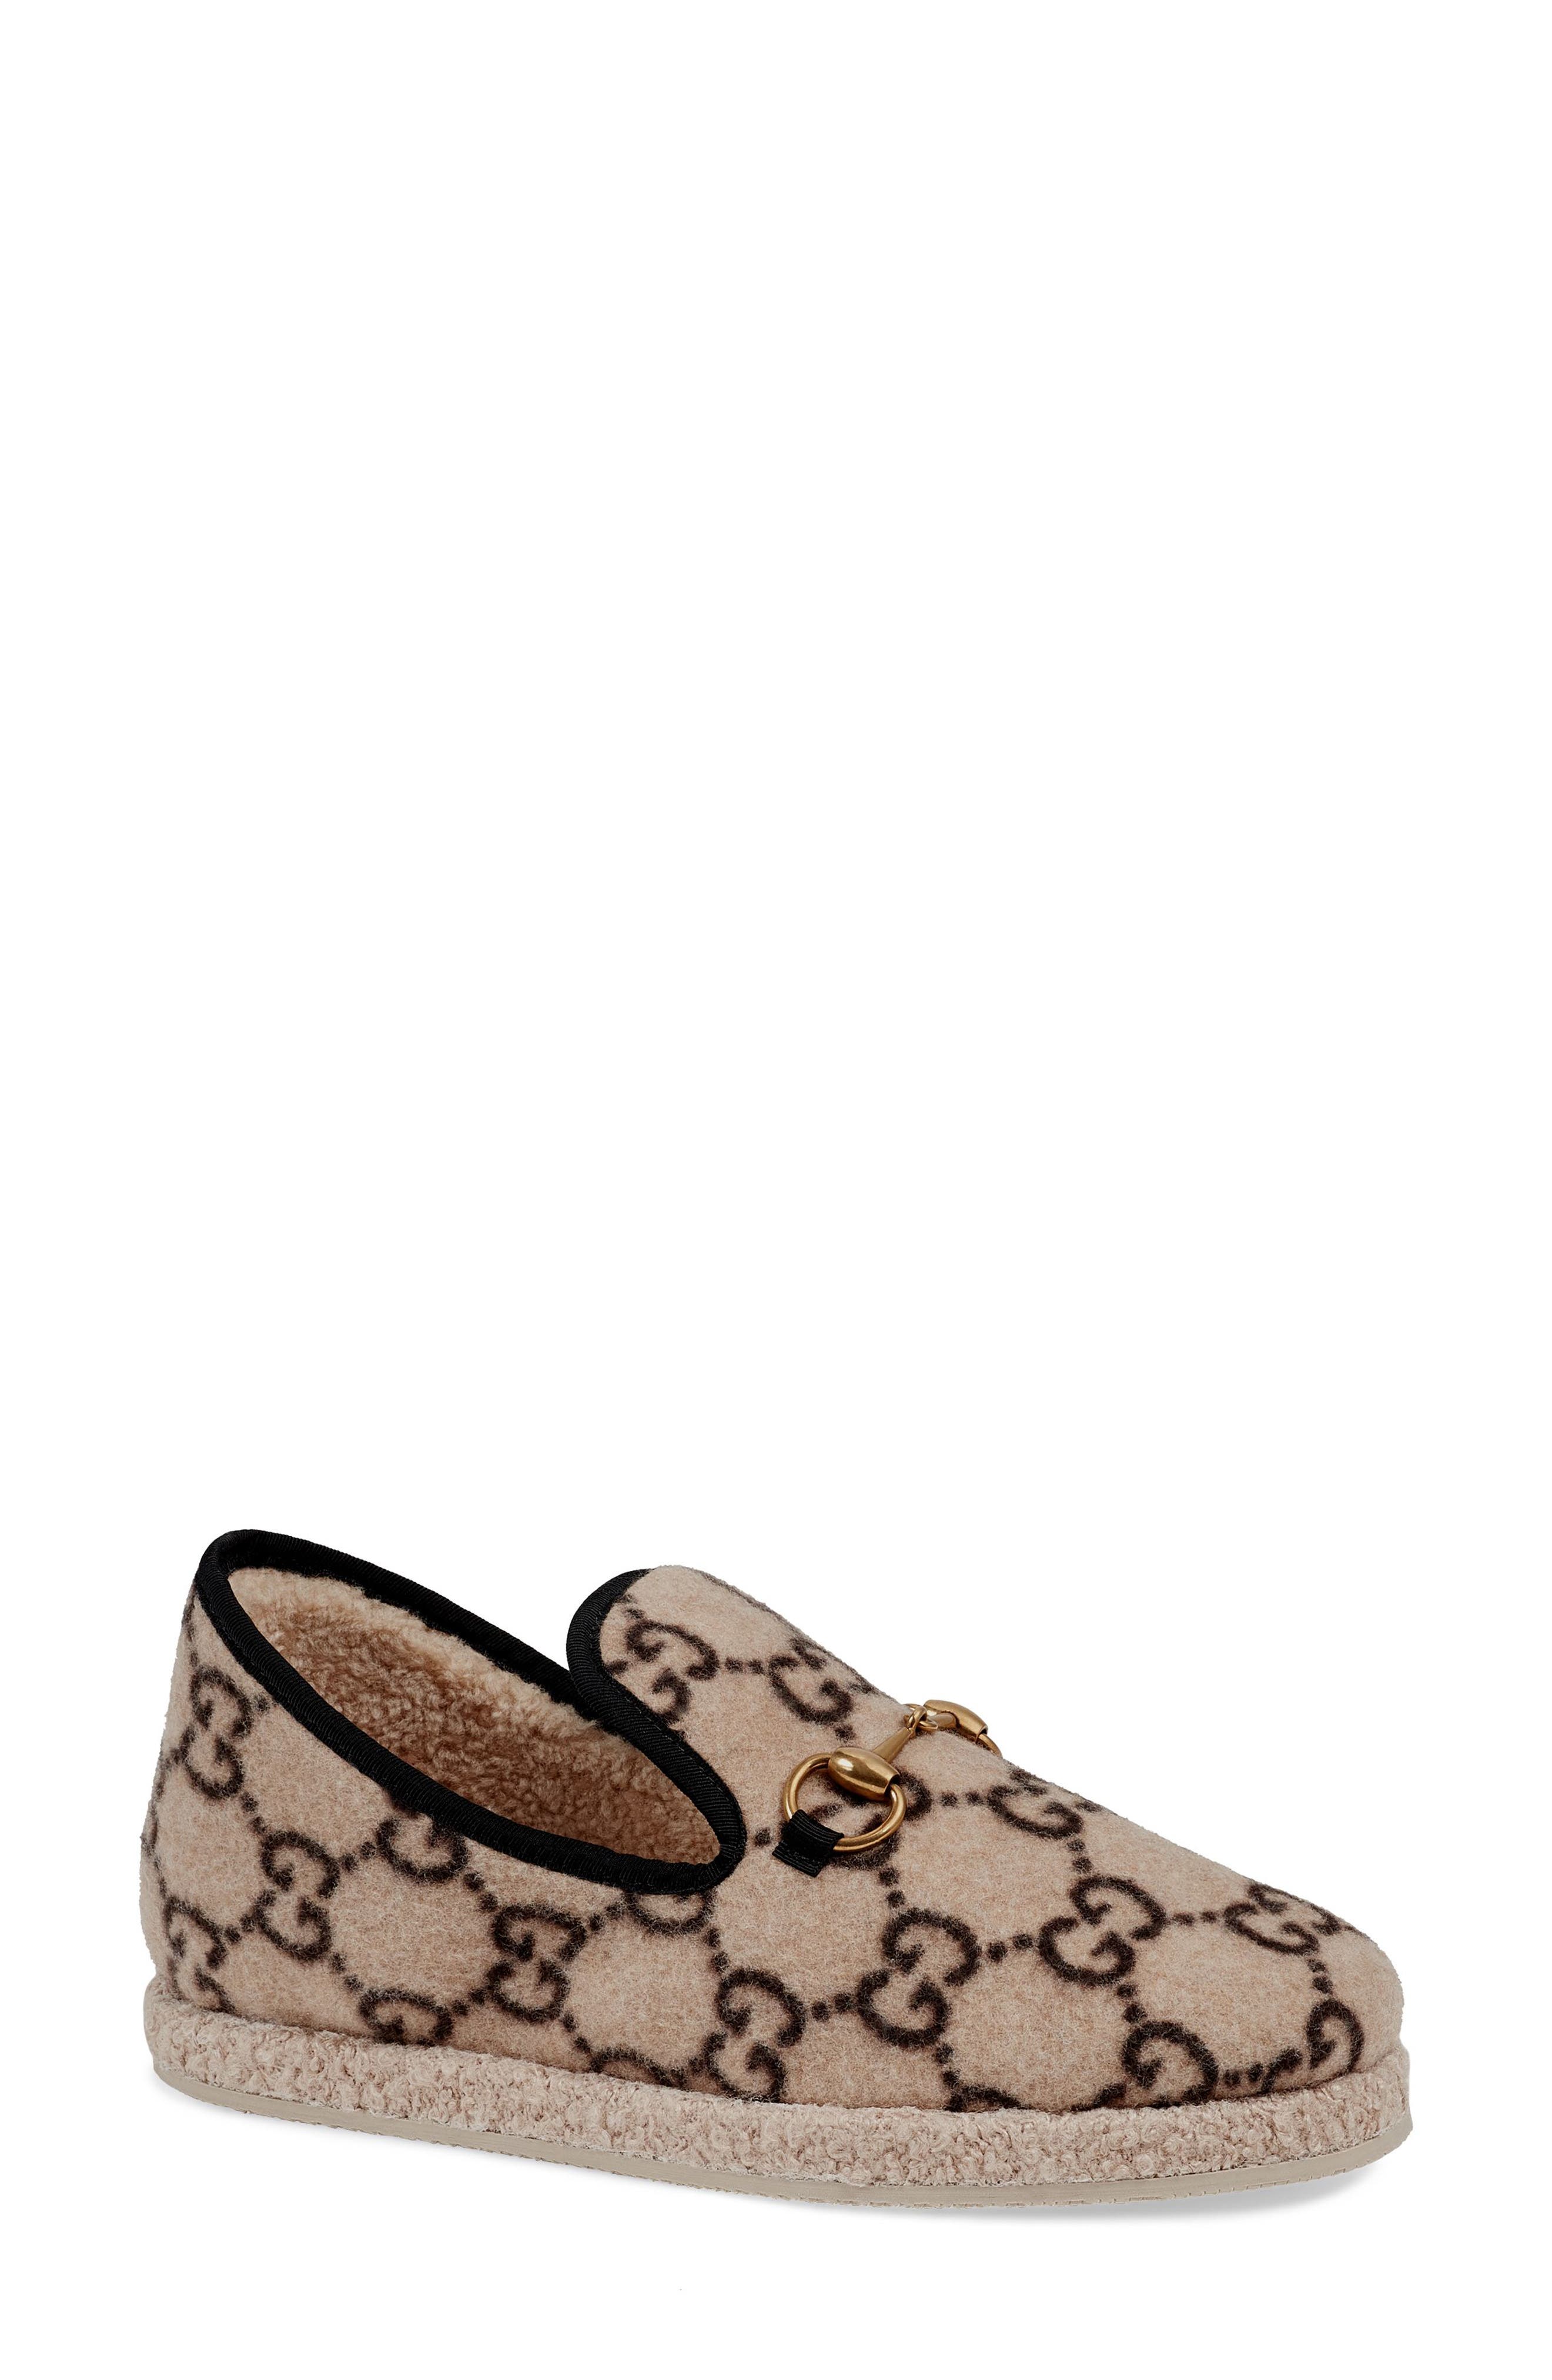 gucci loafers women nordstrom